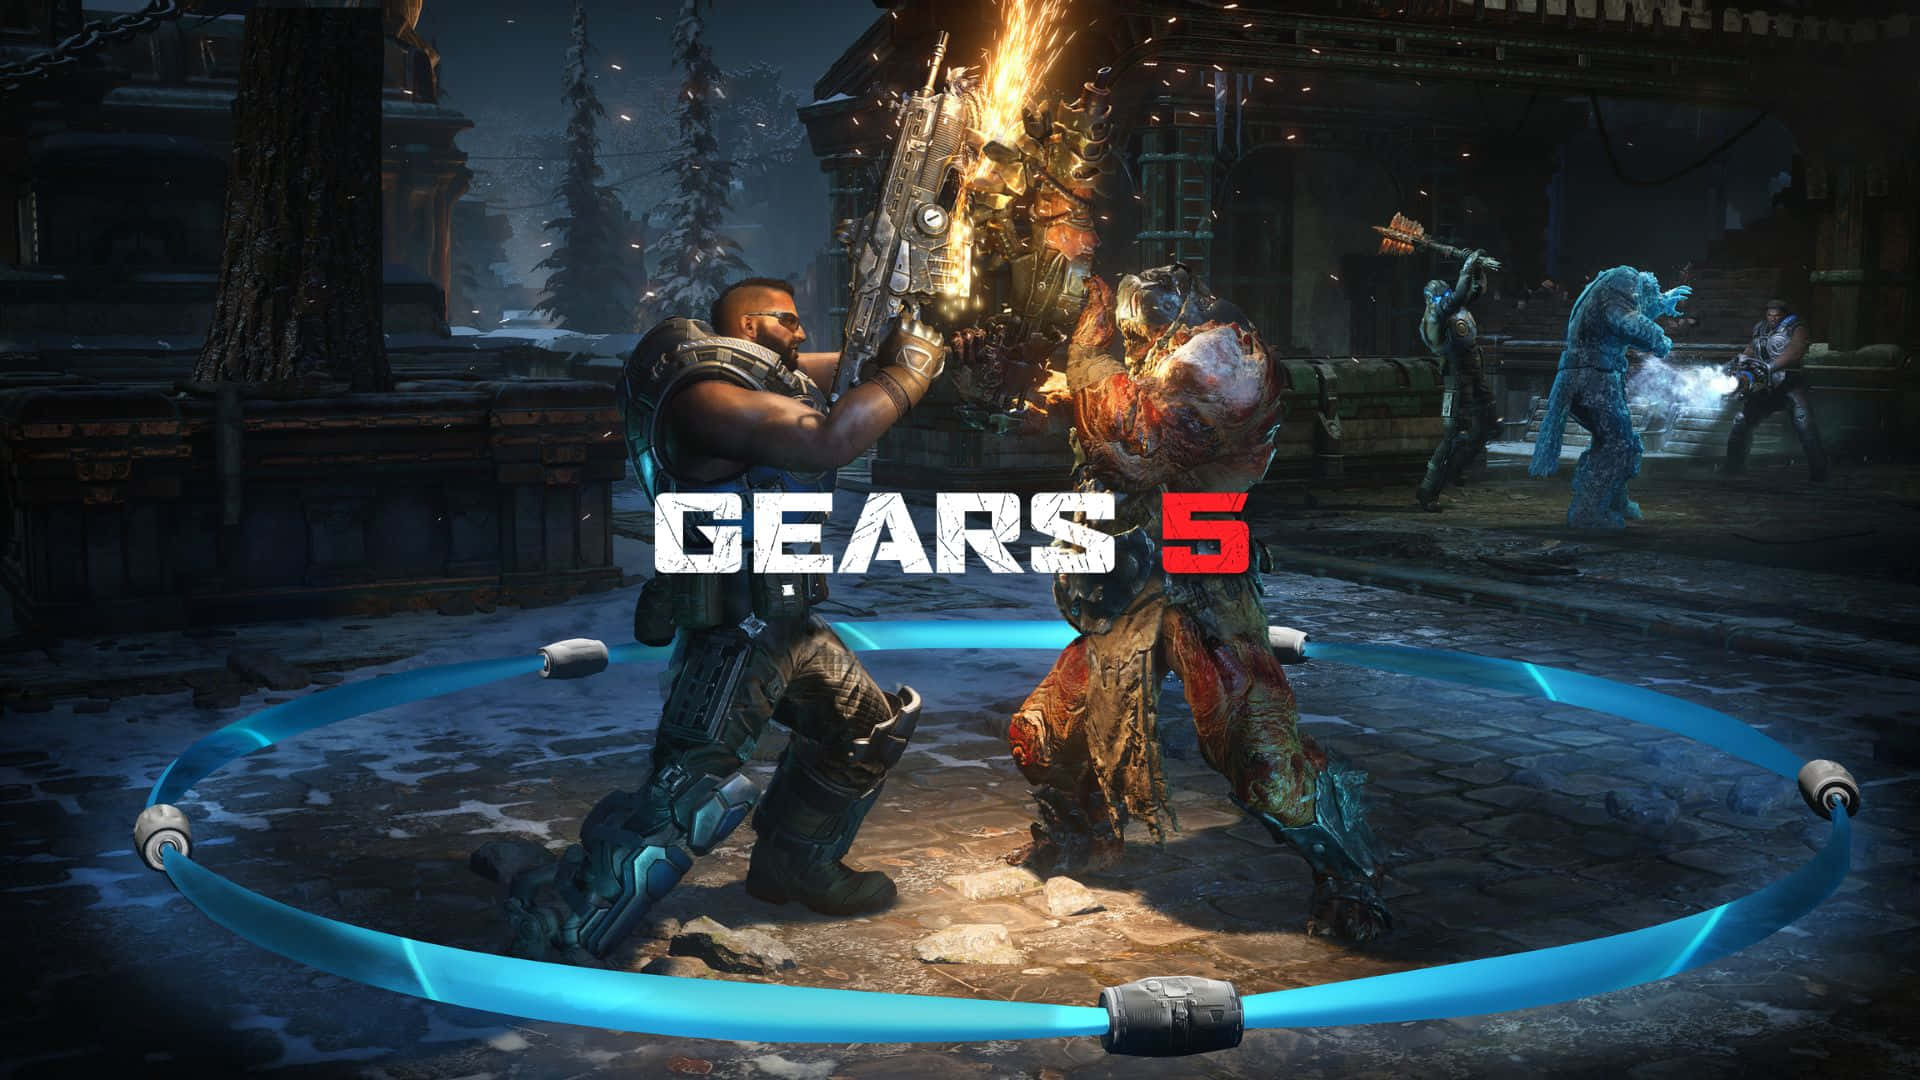 "Journey into battle with Gears of War 5 in stunning 1080p"